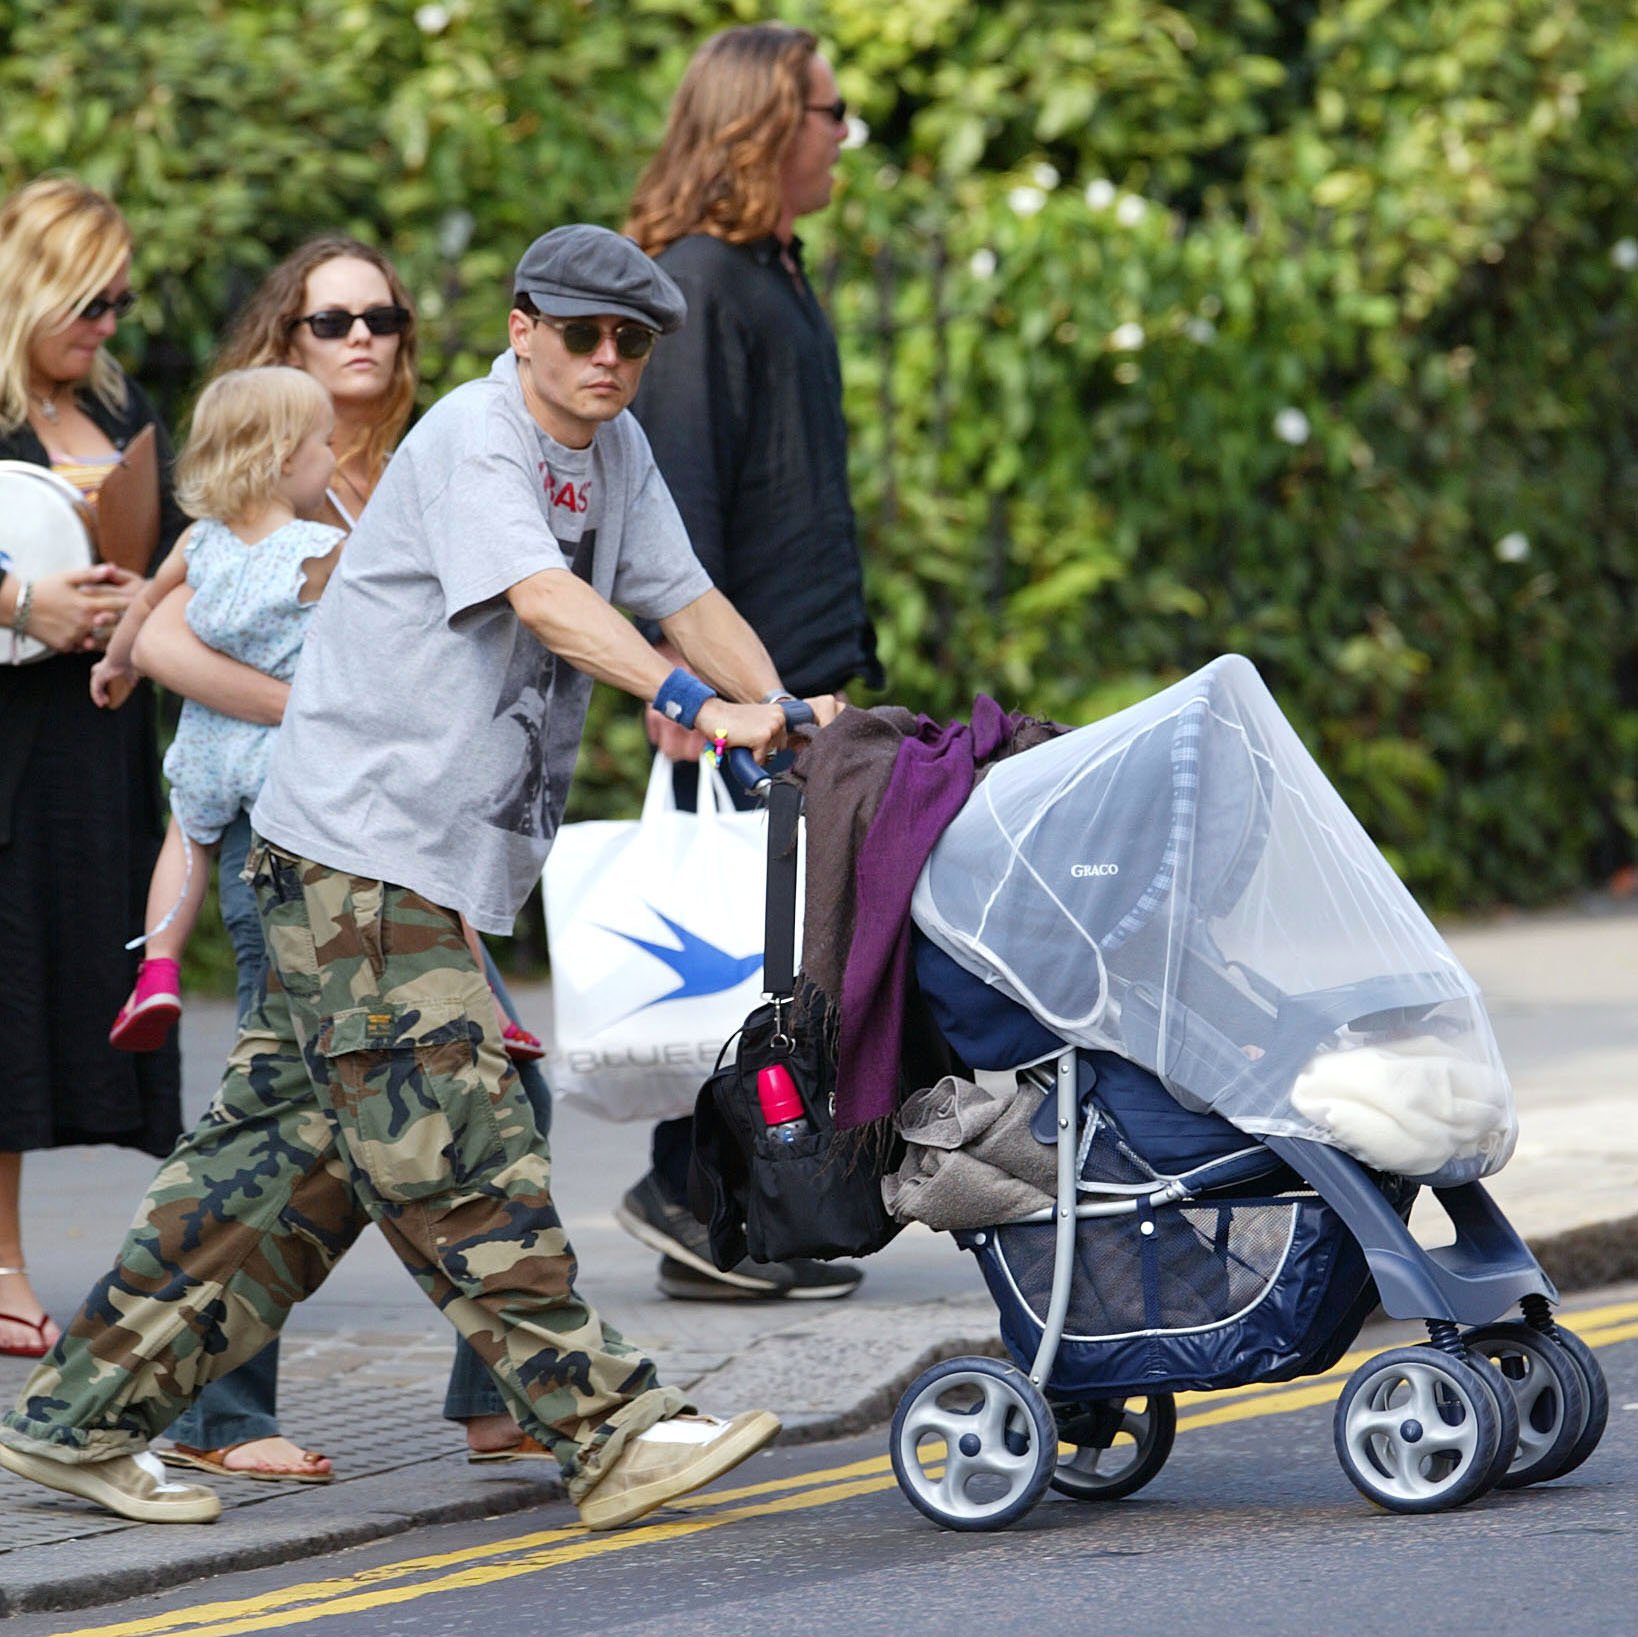 Johnny Depp & Wife Vanessa Paradis Take Their Two Children For A Picnic In A London Park | Source: Getty Images